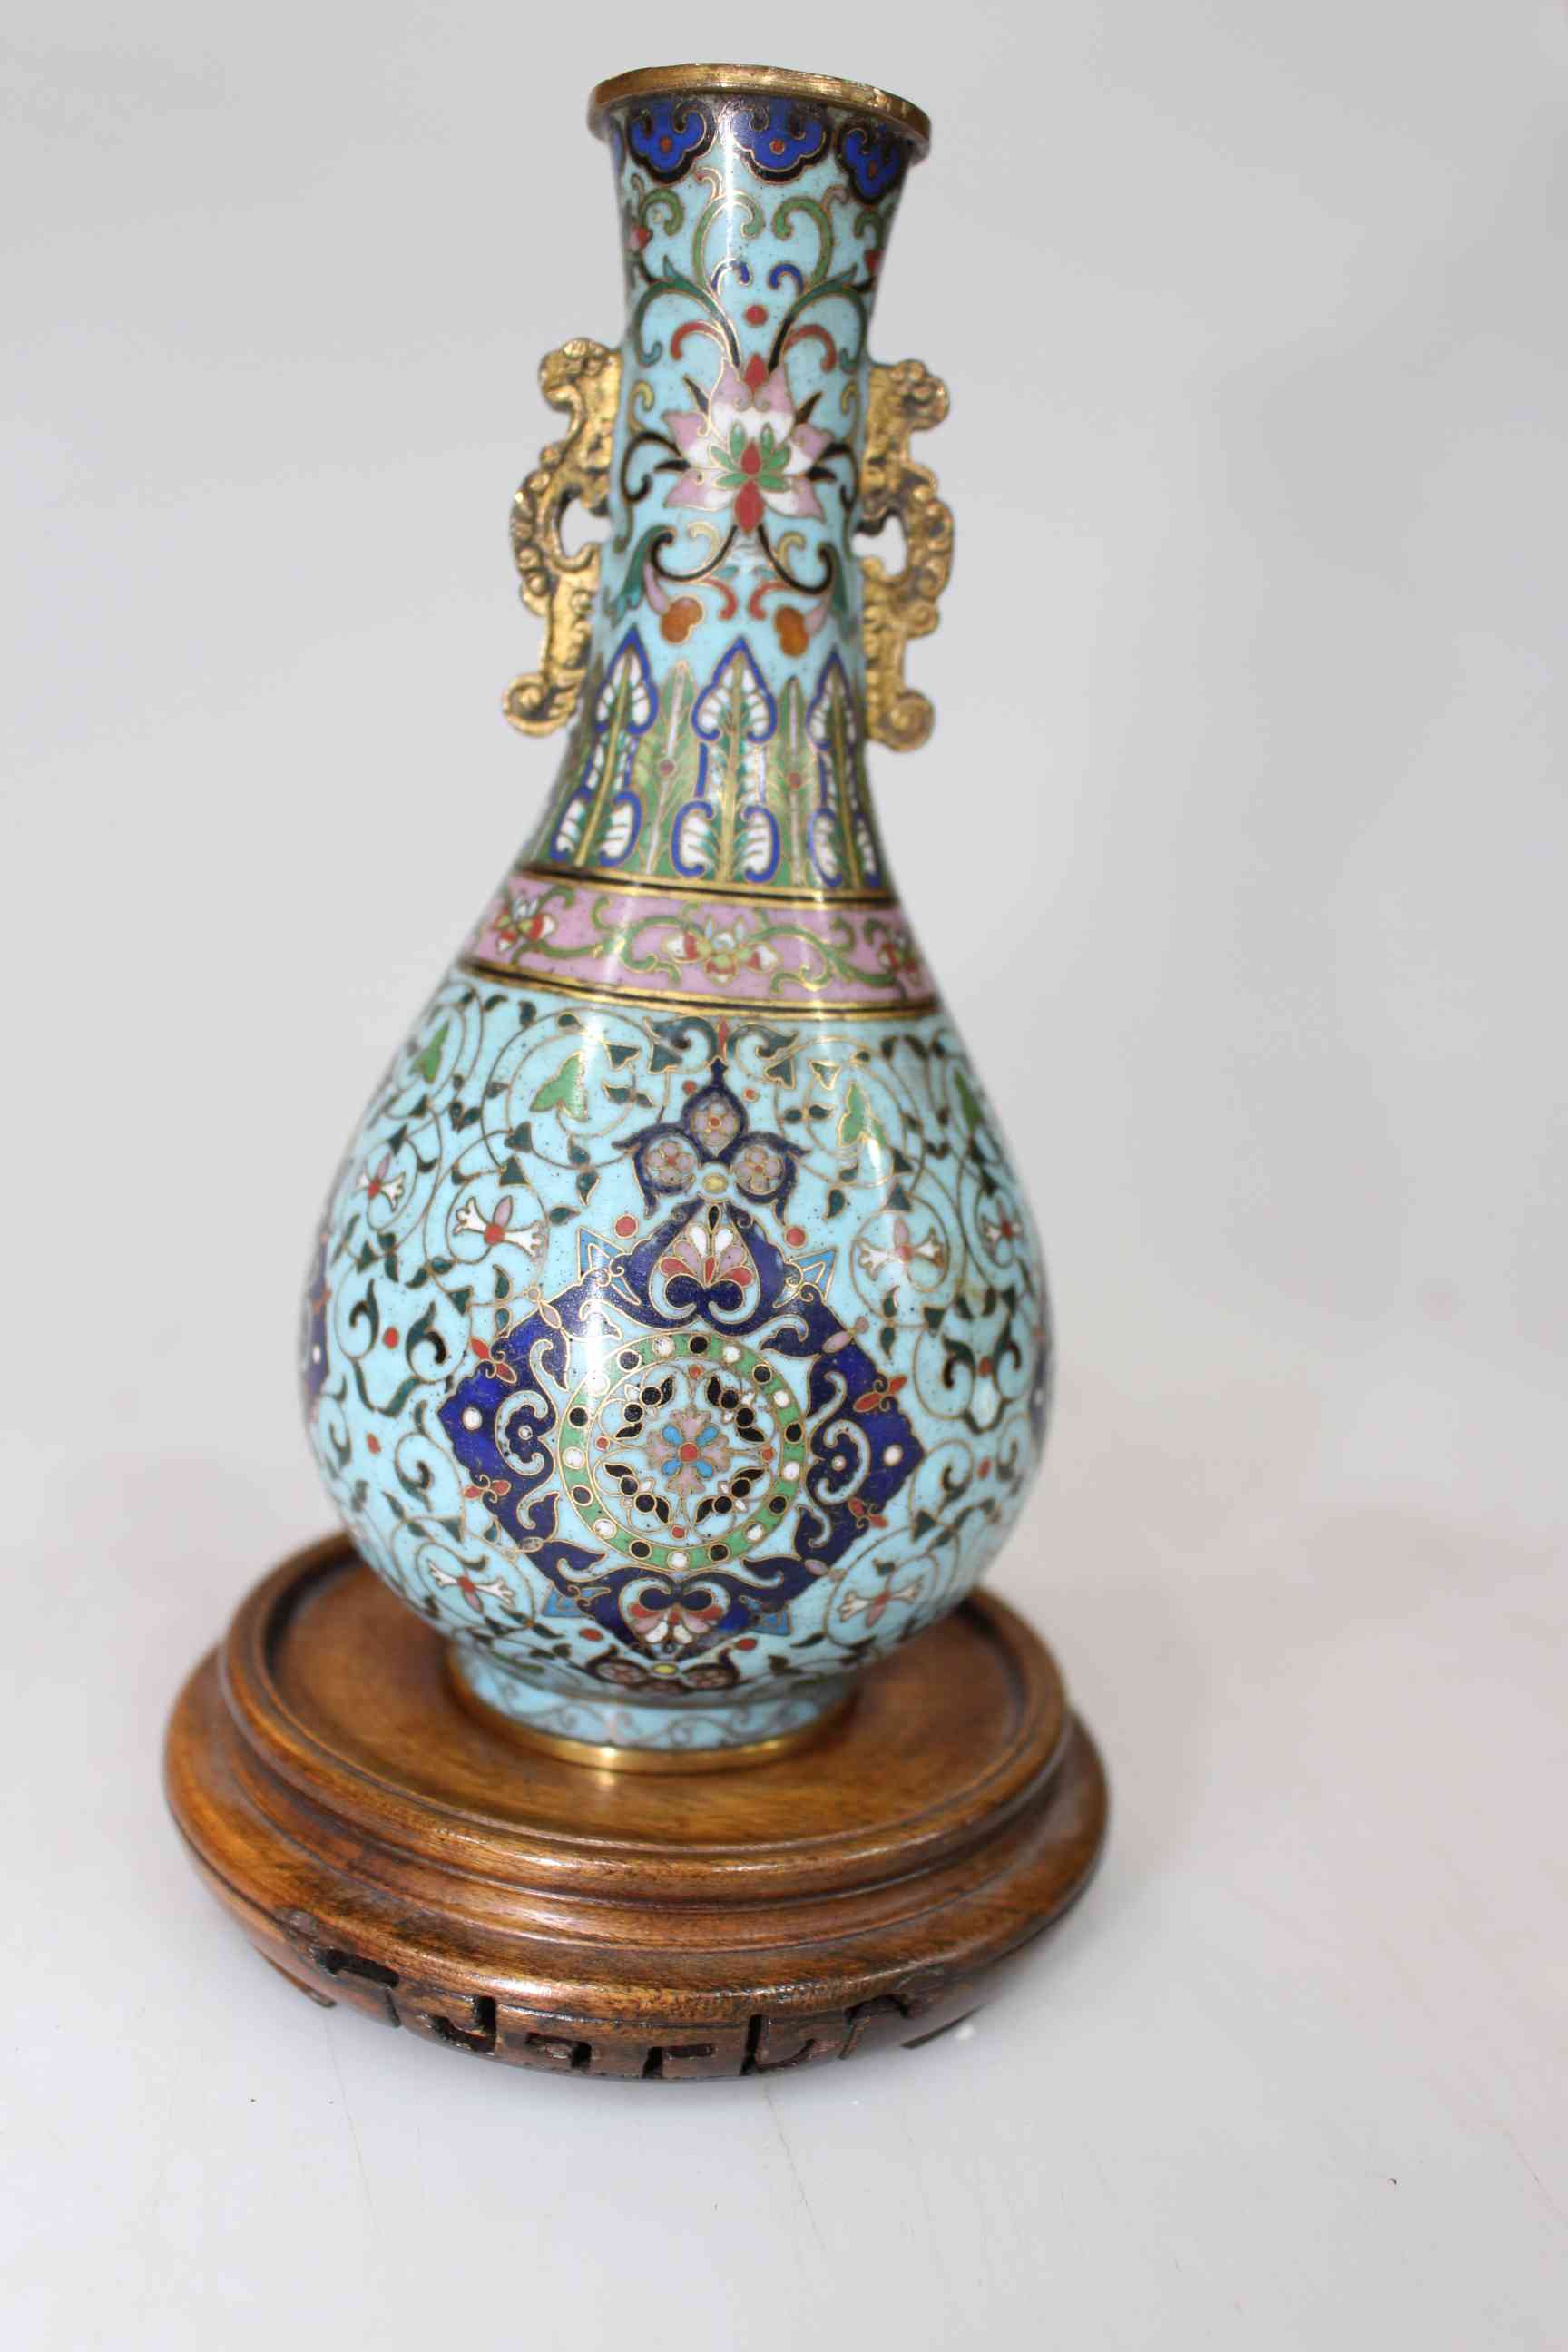 Fine antique Chinese cloisonne vase, with intricate decoration and scrolled side handles, 15cm high,